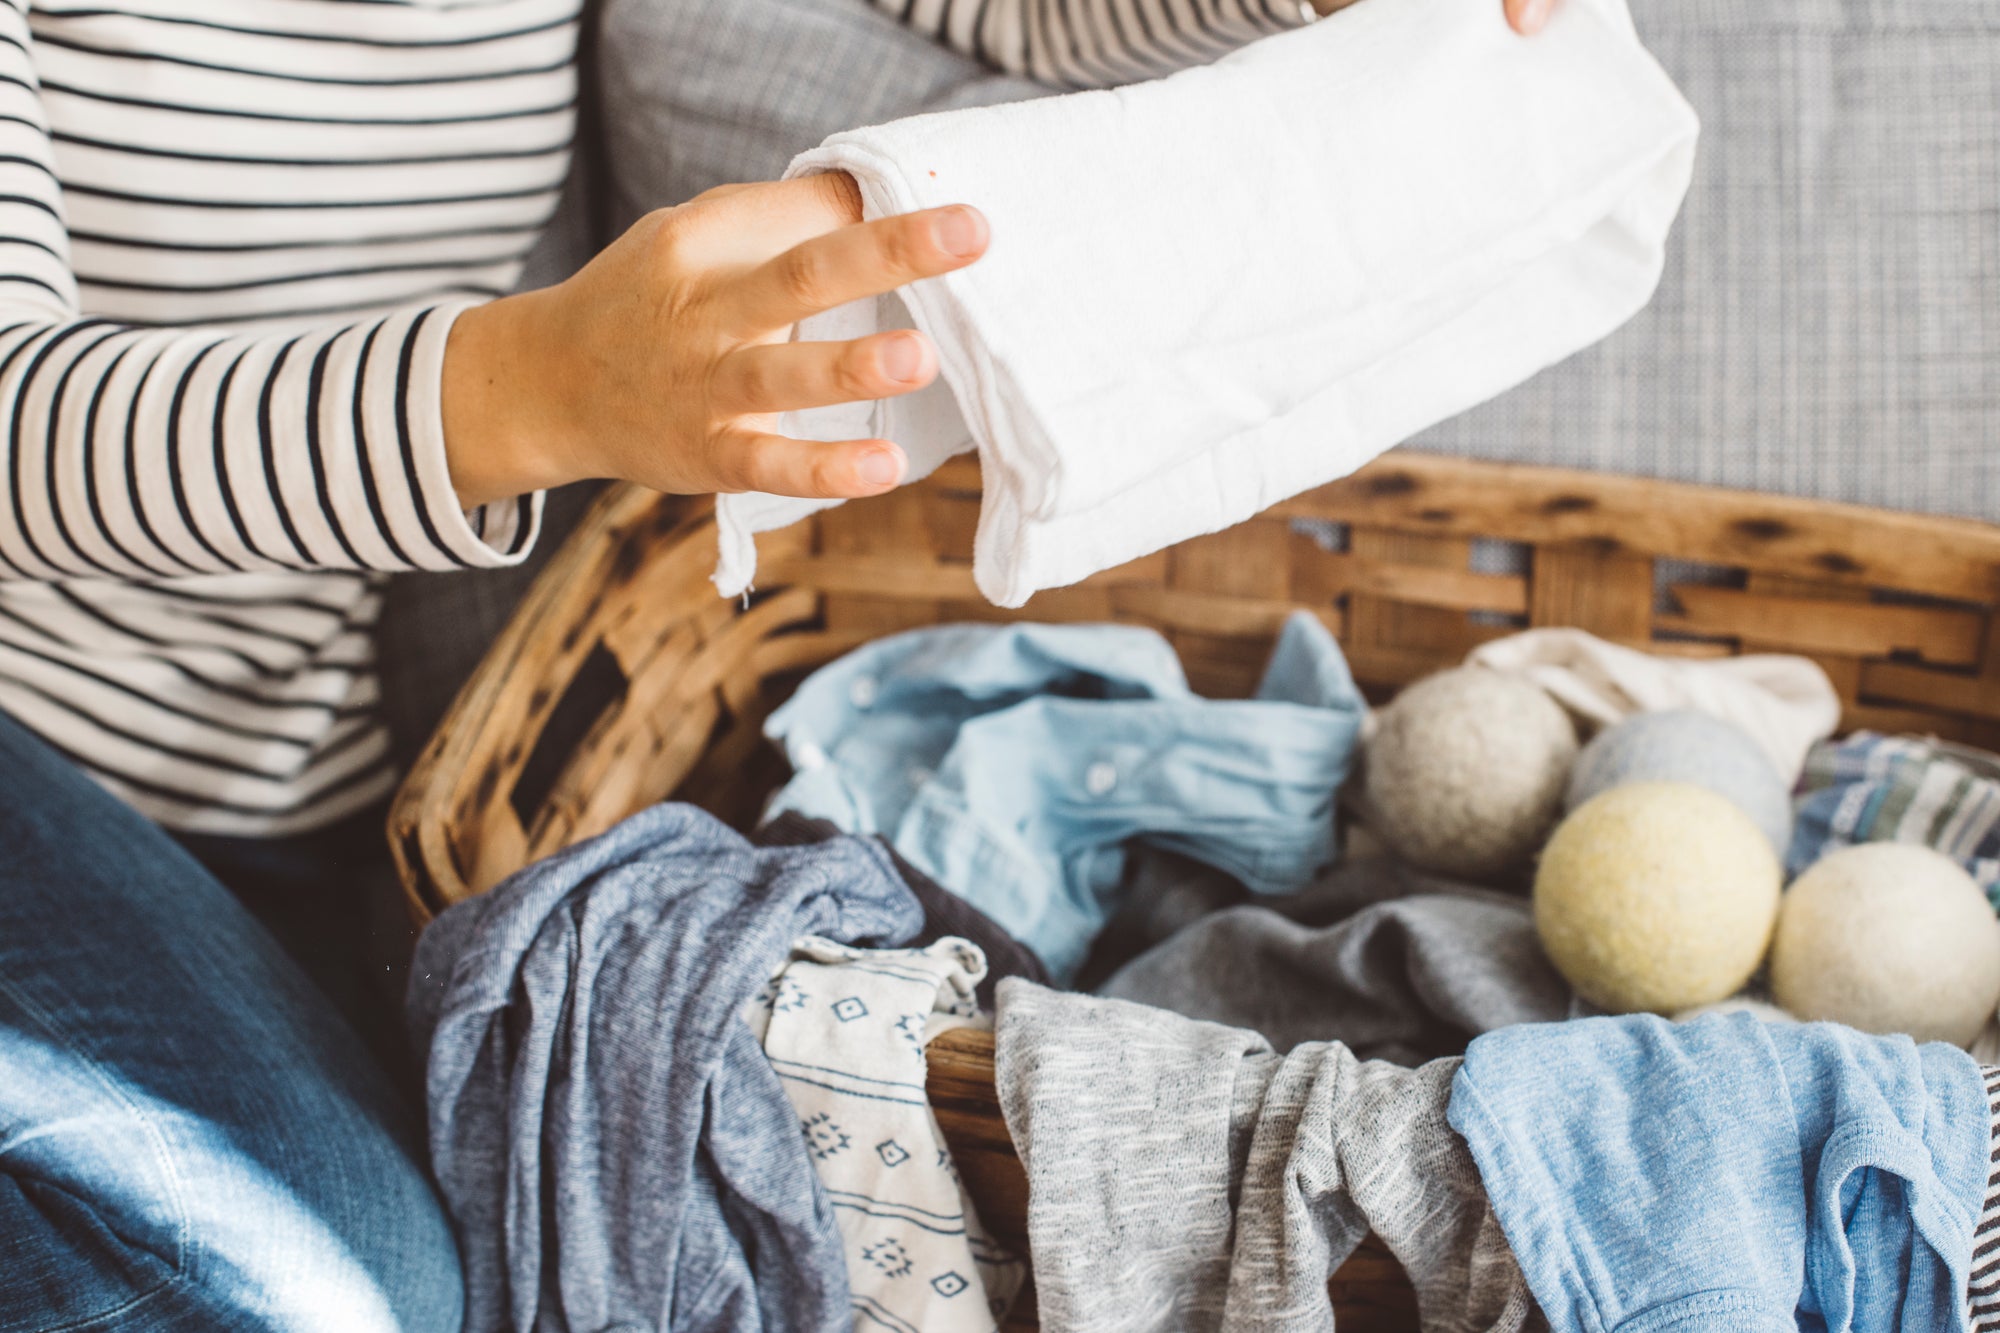 What Sort of Laundry Maven are You?